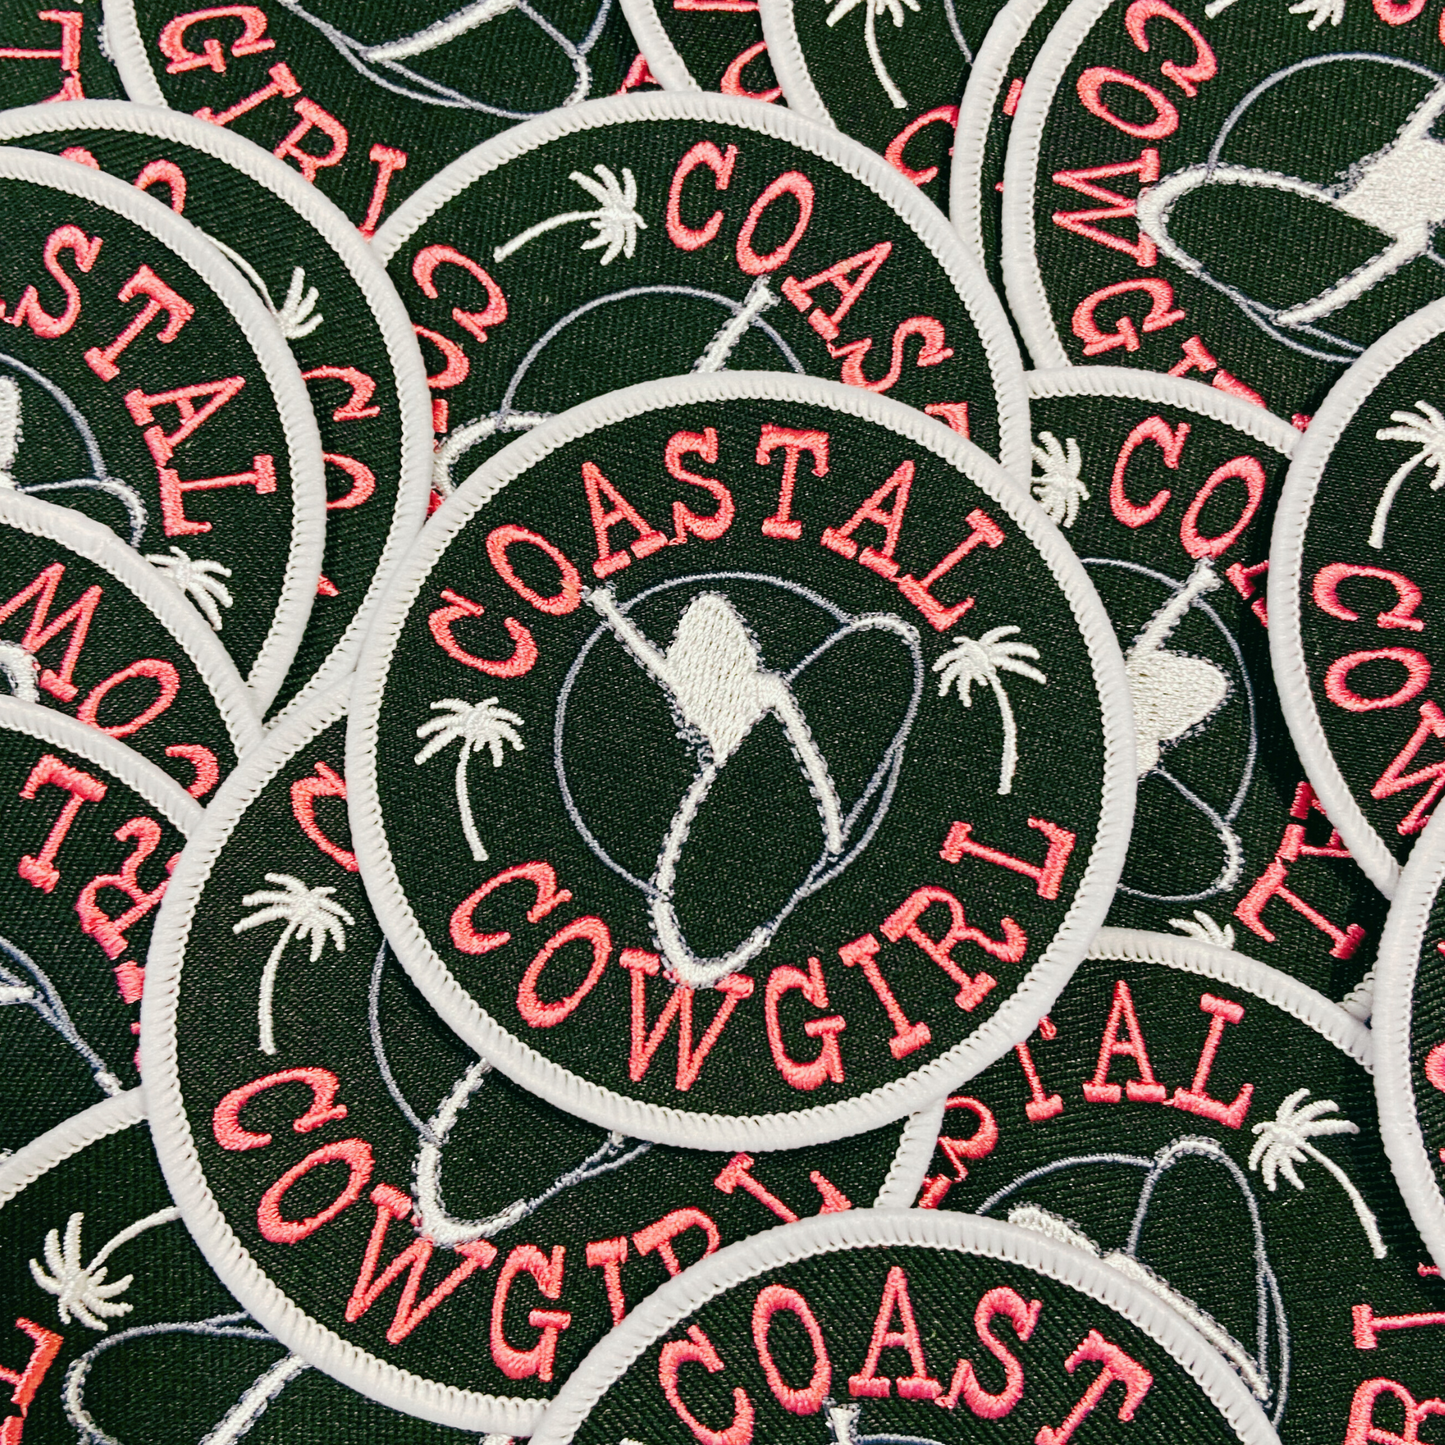 3" Coastal Cowgirl  - Embroidered Hat Patch